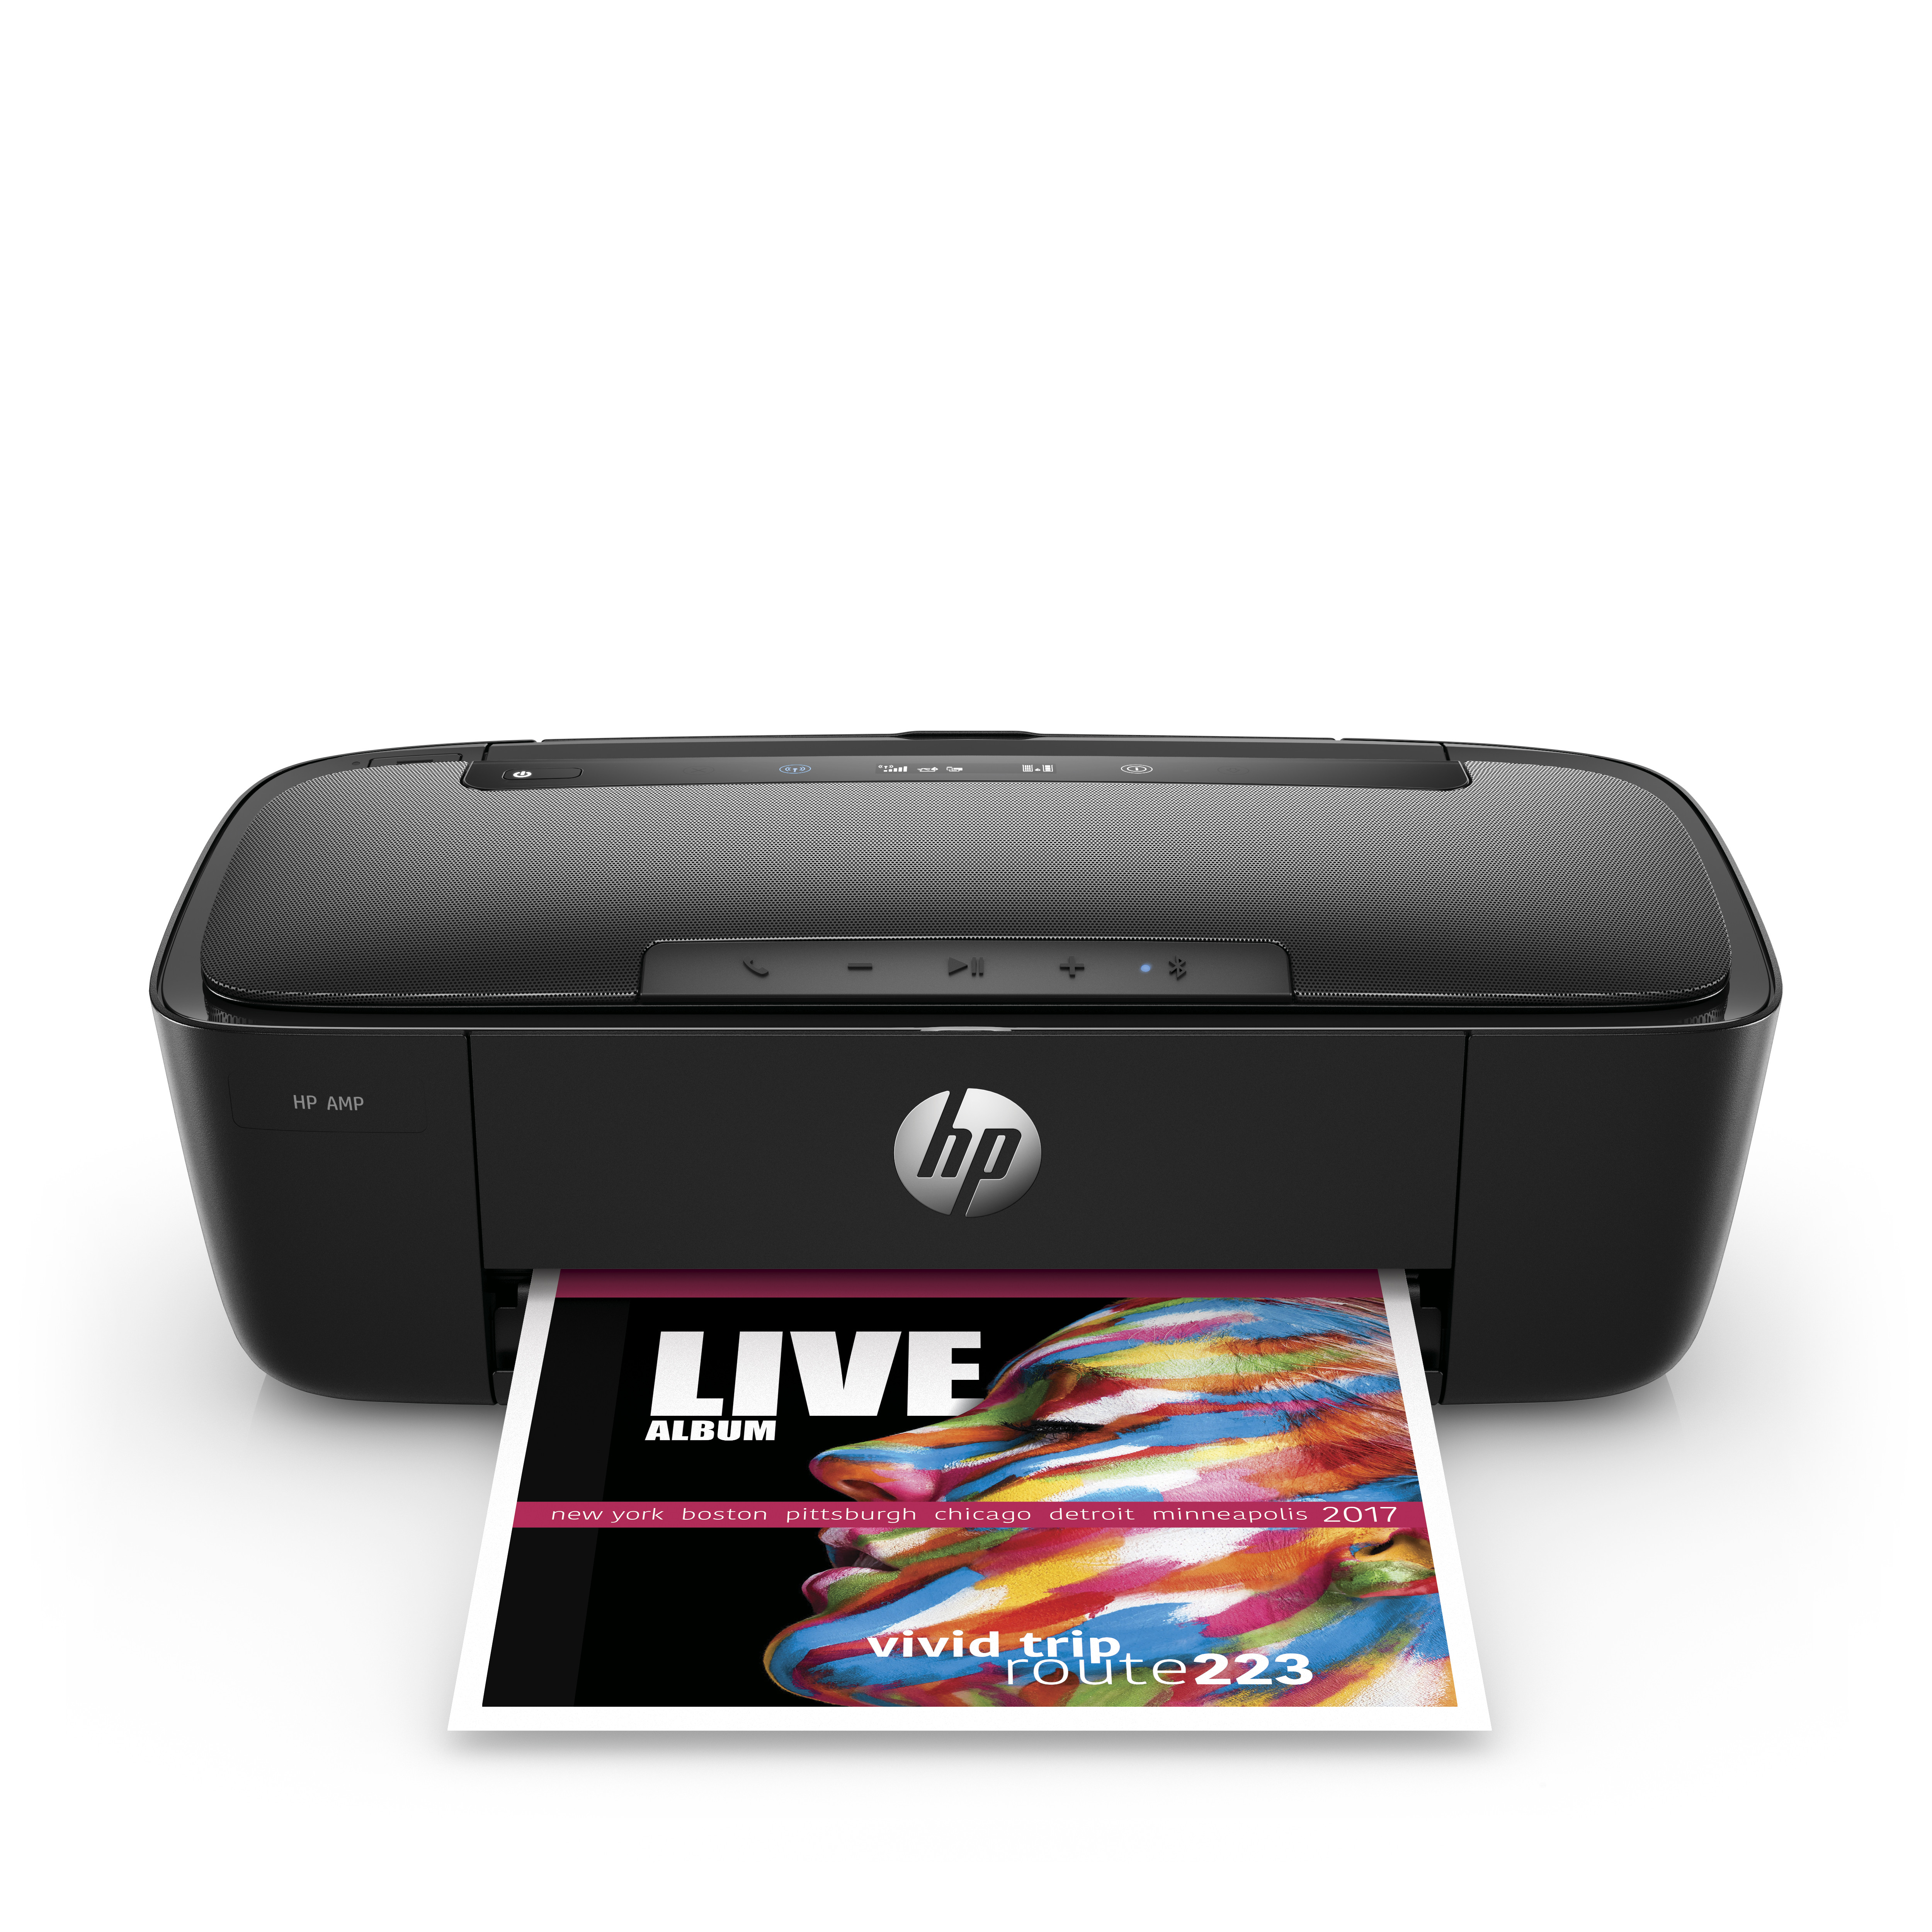 HP T8X39A#1H5 AMP 100 Printer with built-in Bluetooth speaker - image 3 of 17